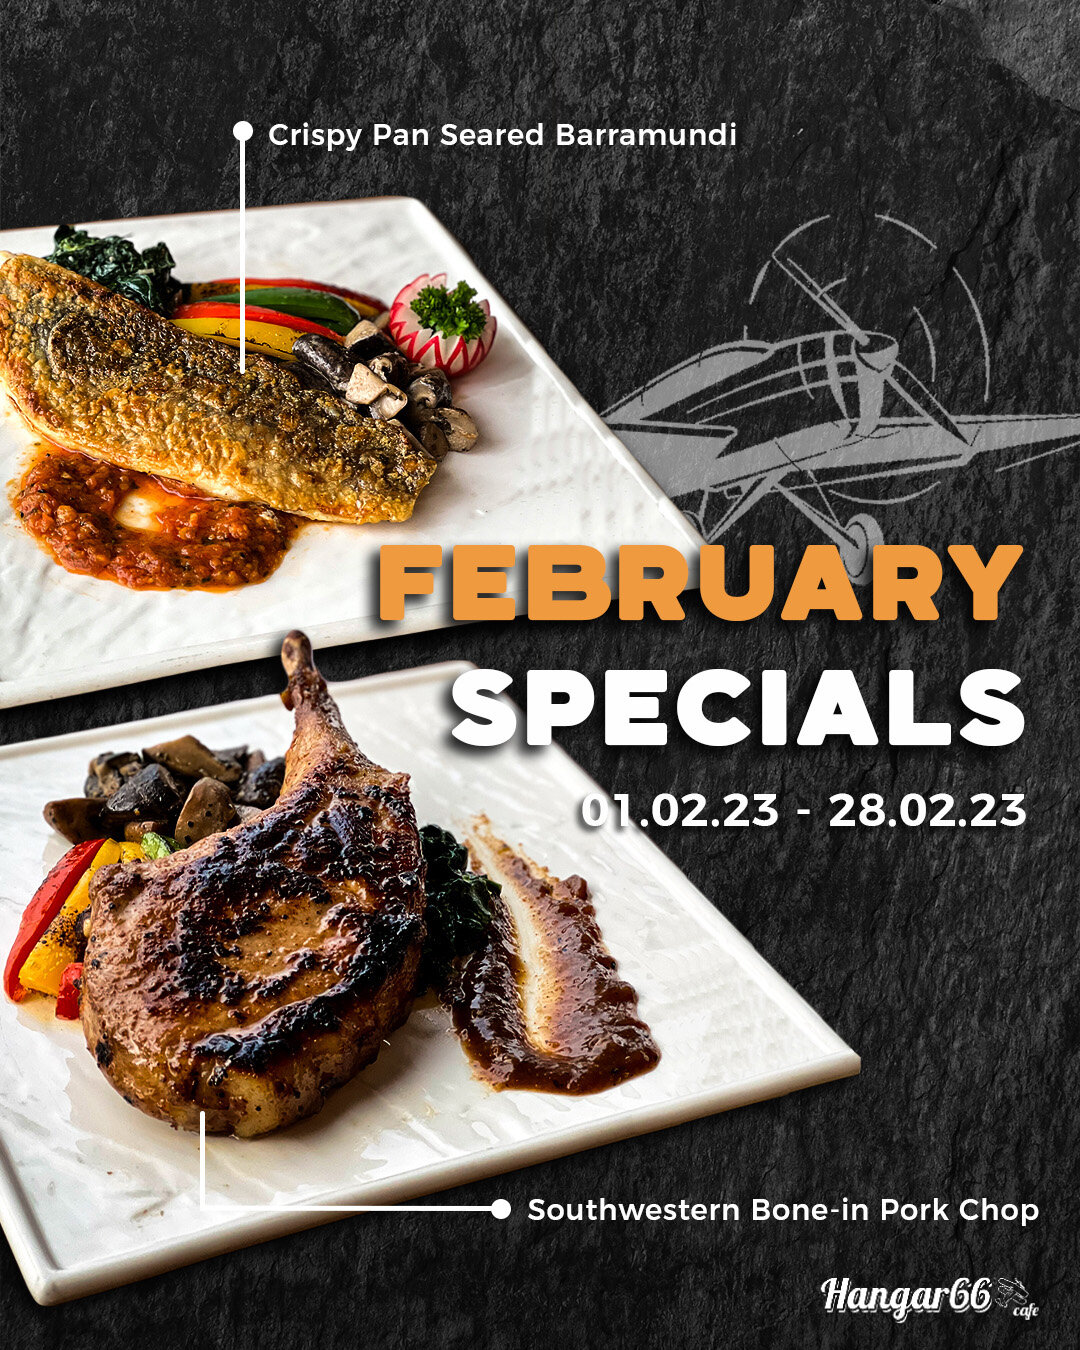 Treat your taste buds to a culinary adventure this February with two delectable dishes to choose from 👩🏼&zwj;🍳

Flavourful Southwestern Bone-in Pork Chop or Crispy Pan Seared Barramundi? Both dishes are expertly prepared and bursting with flavour.